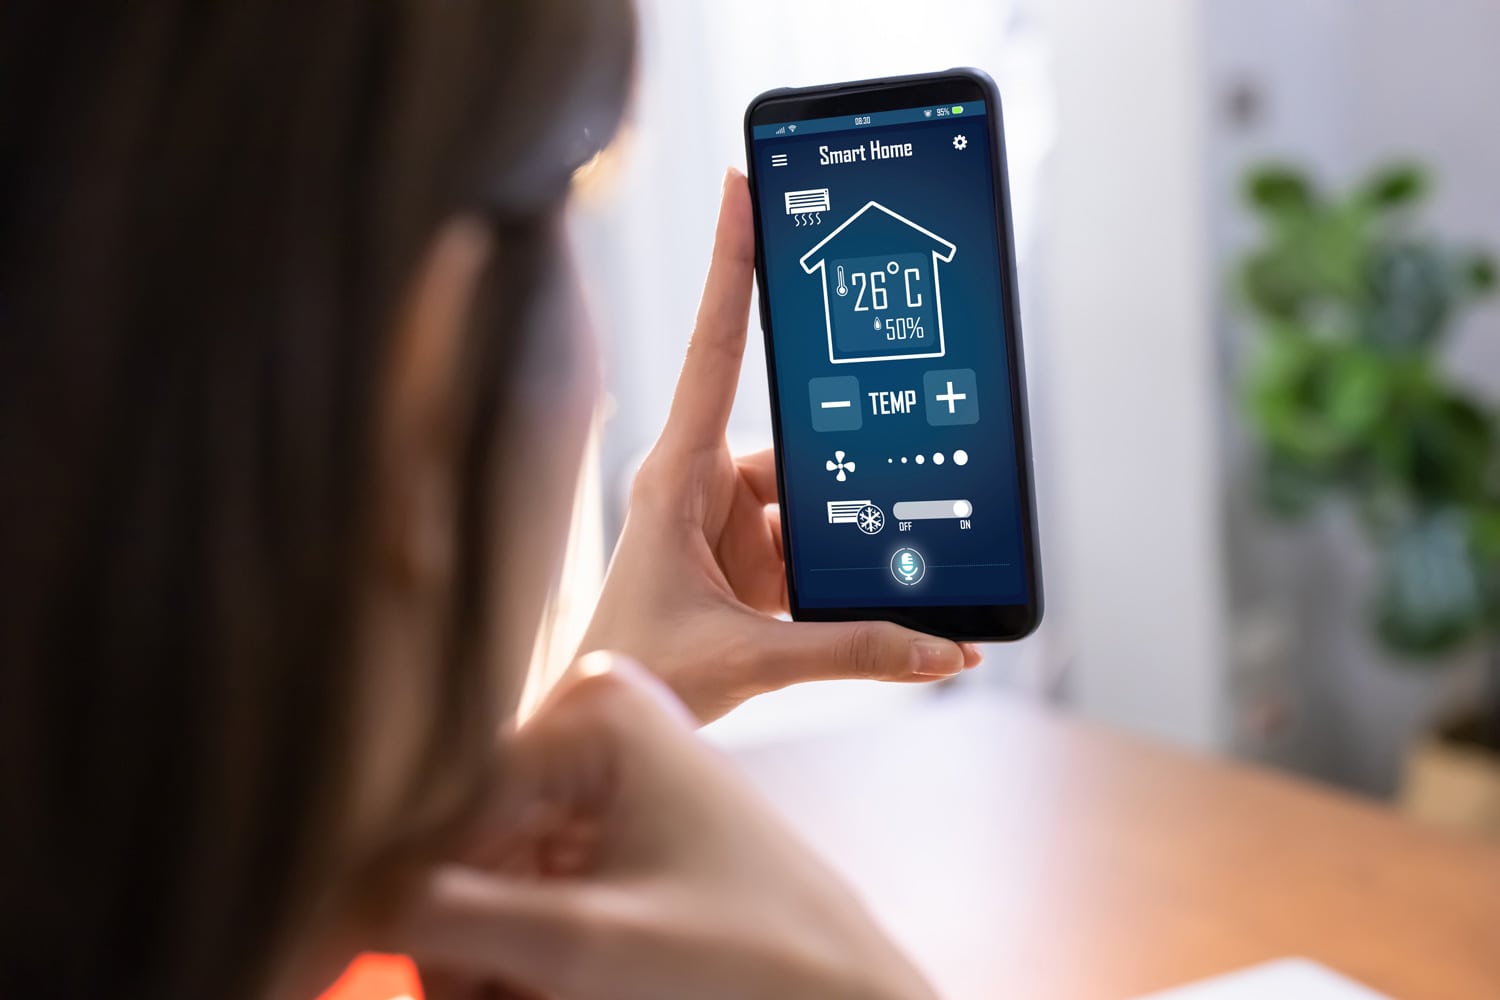 CLOSE UP of young woman using smart home app on mobile phone to control air conditioner temperature